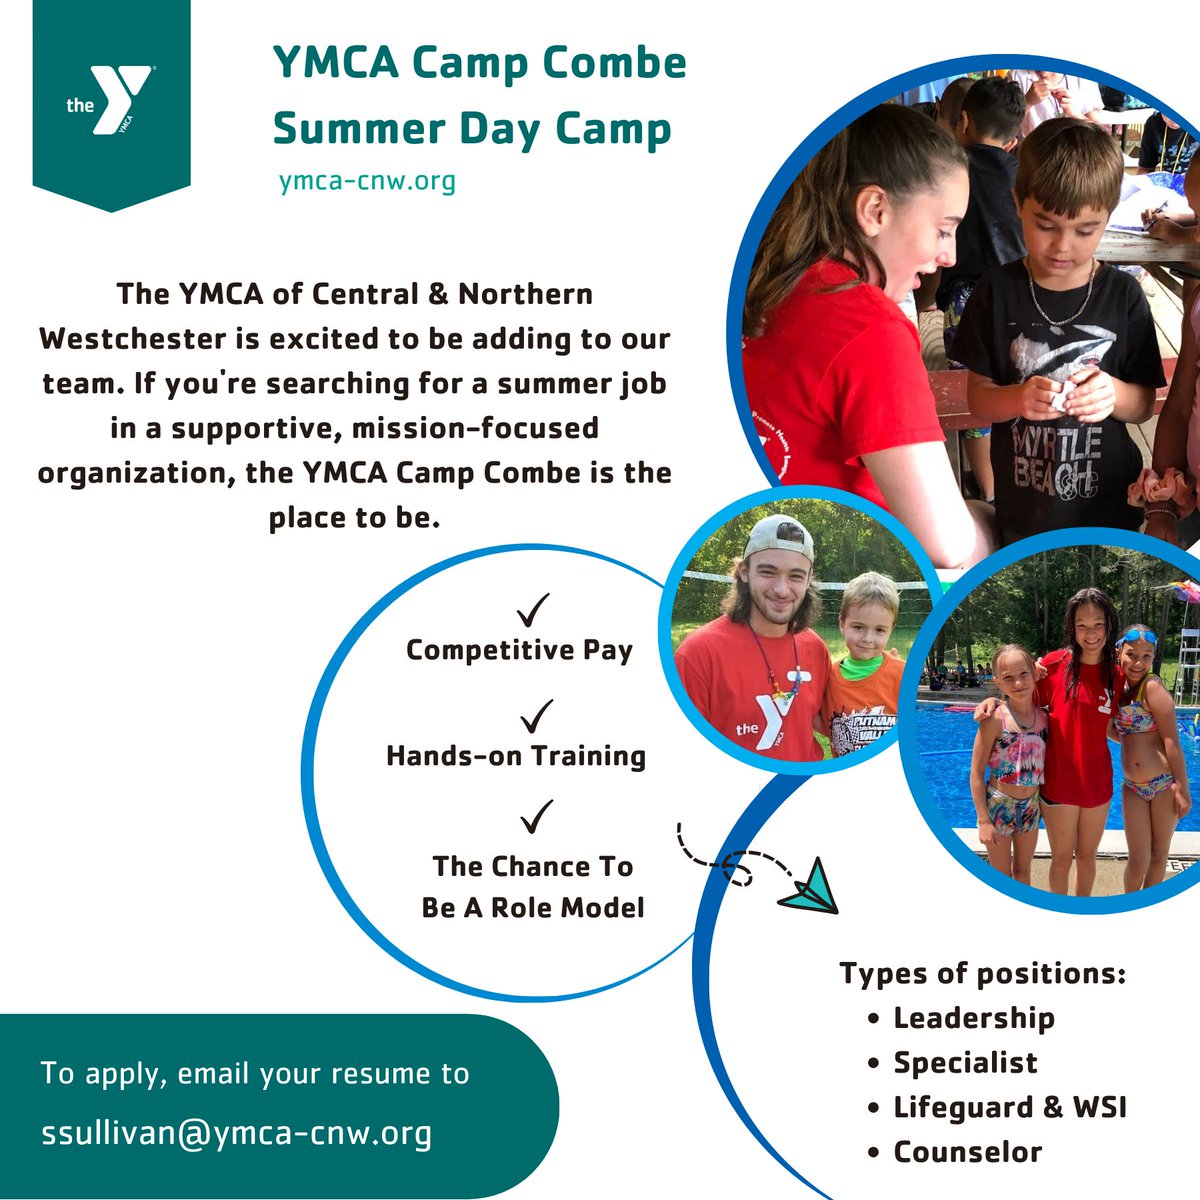 Did you know? At YMCA Camp Combe, we believe in equitable youth employment. That's why our camp staff receives competitive hourly wages instead of stipends. It's our way of supporting and valuing our incredible team! 
#FairWages 
Available positions - hubs.ly/Q02rH-3r0